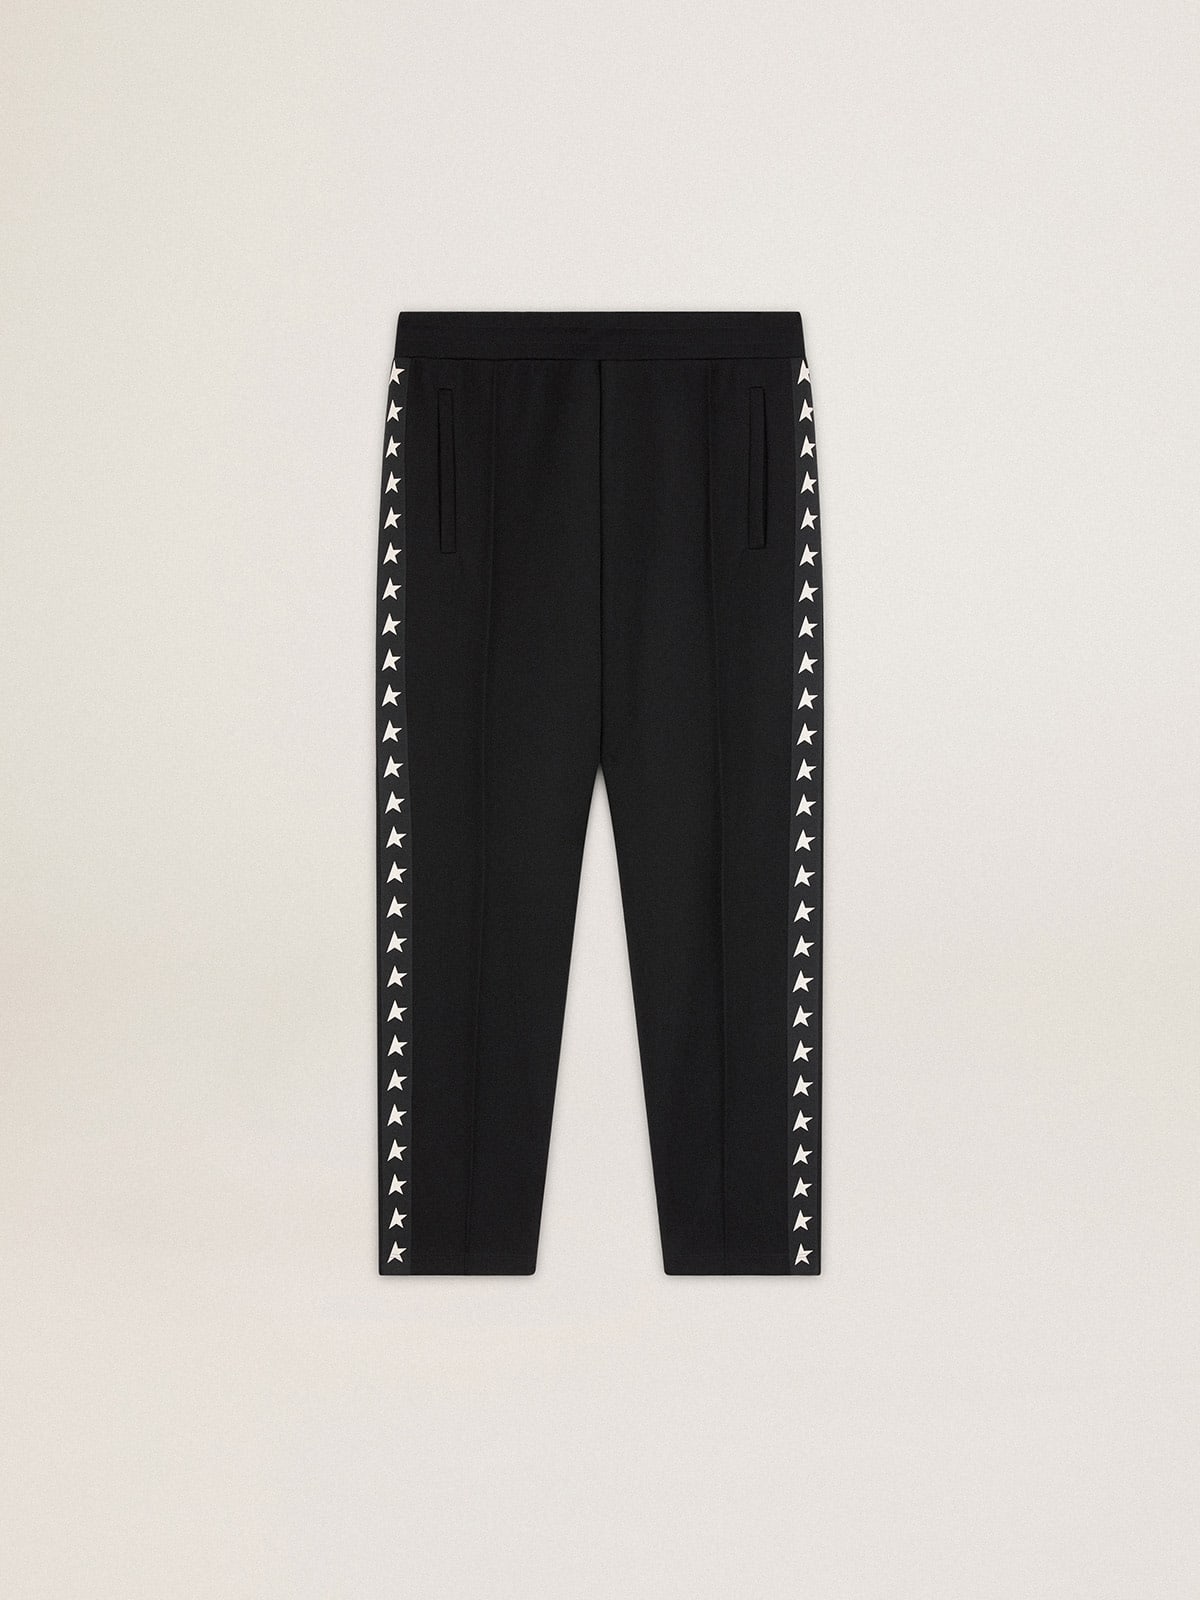 Men's black joggers with white stars on the sides